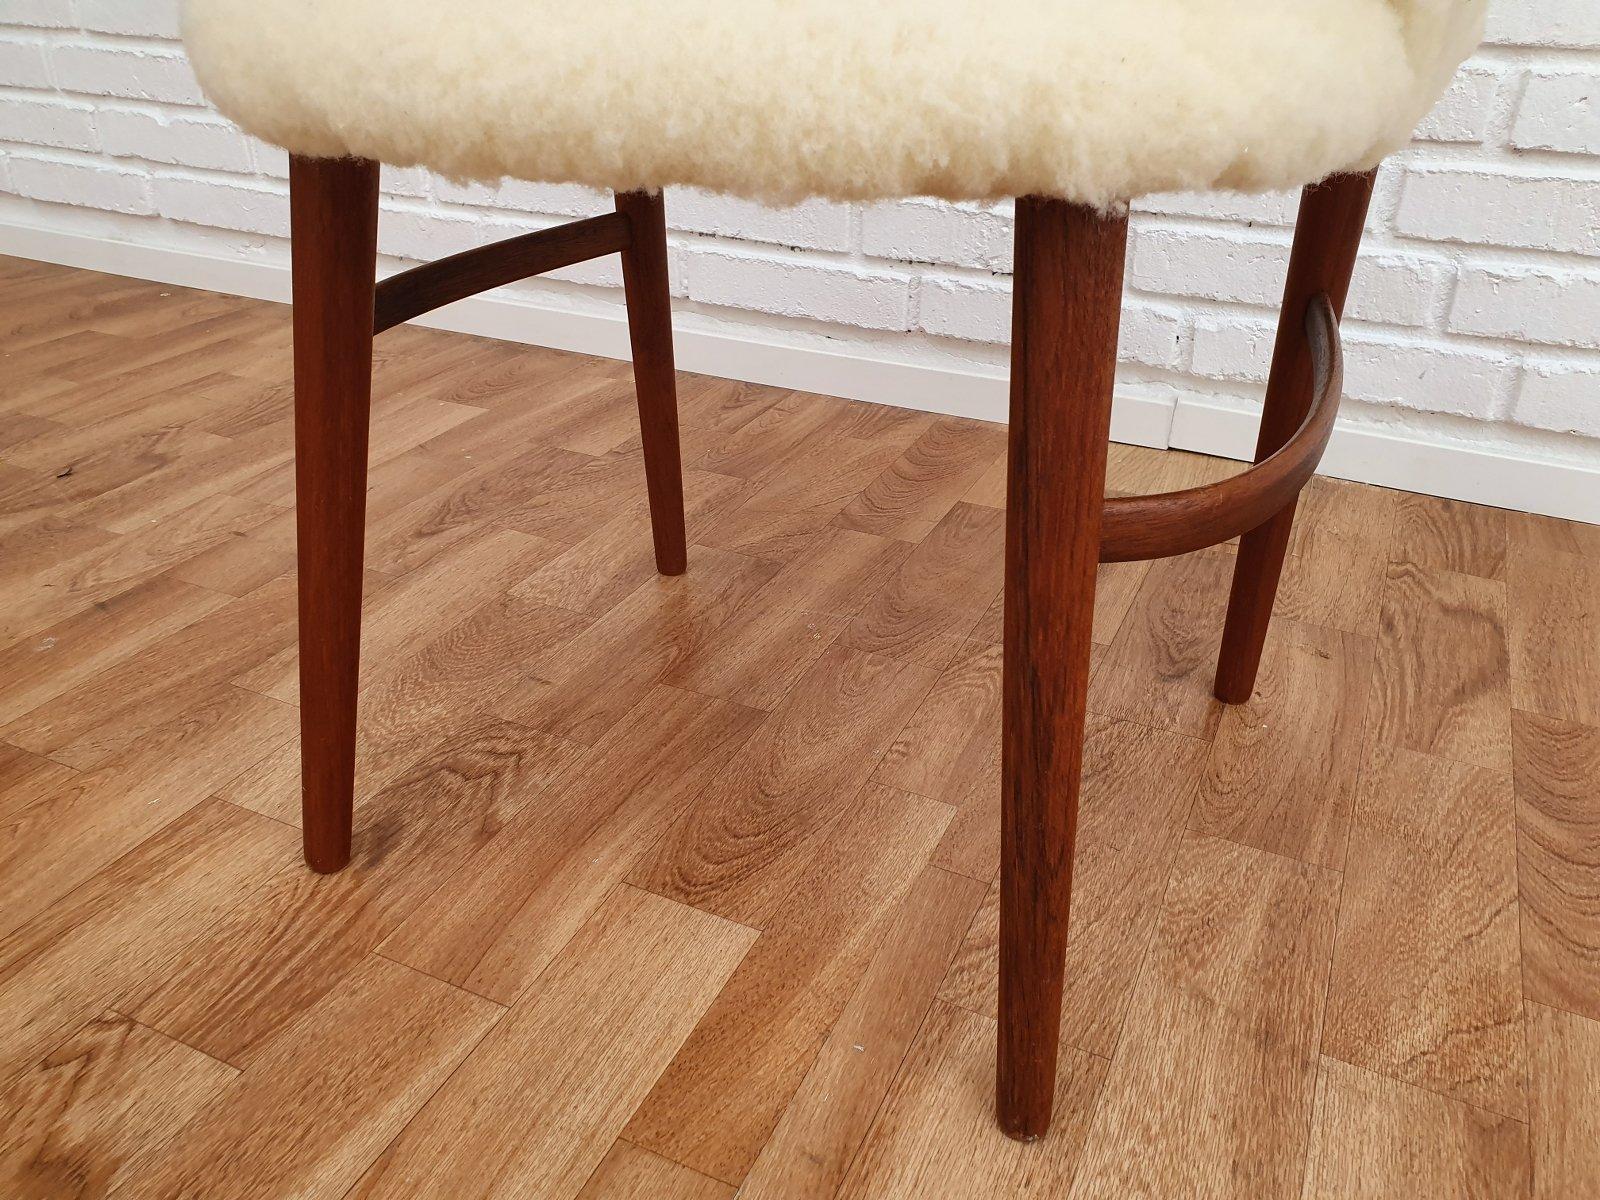 Frode Holm, Danish make up chair. Manufactured in about 1960 with Chr. Linnebergs Møbelfabrik. Teak legs. Completely renovated by craftsman, furniture upholsterer at Retro Møbler Galleri. Brand new padding with natural coconut mat. New upholstered